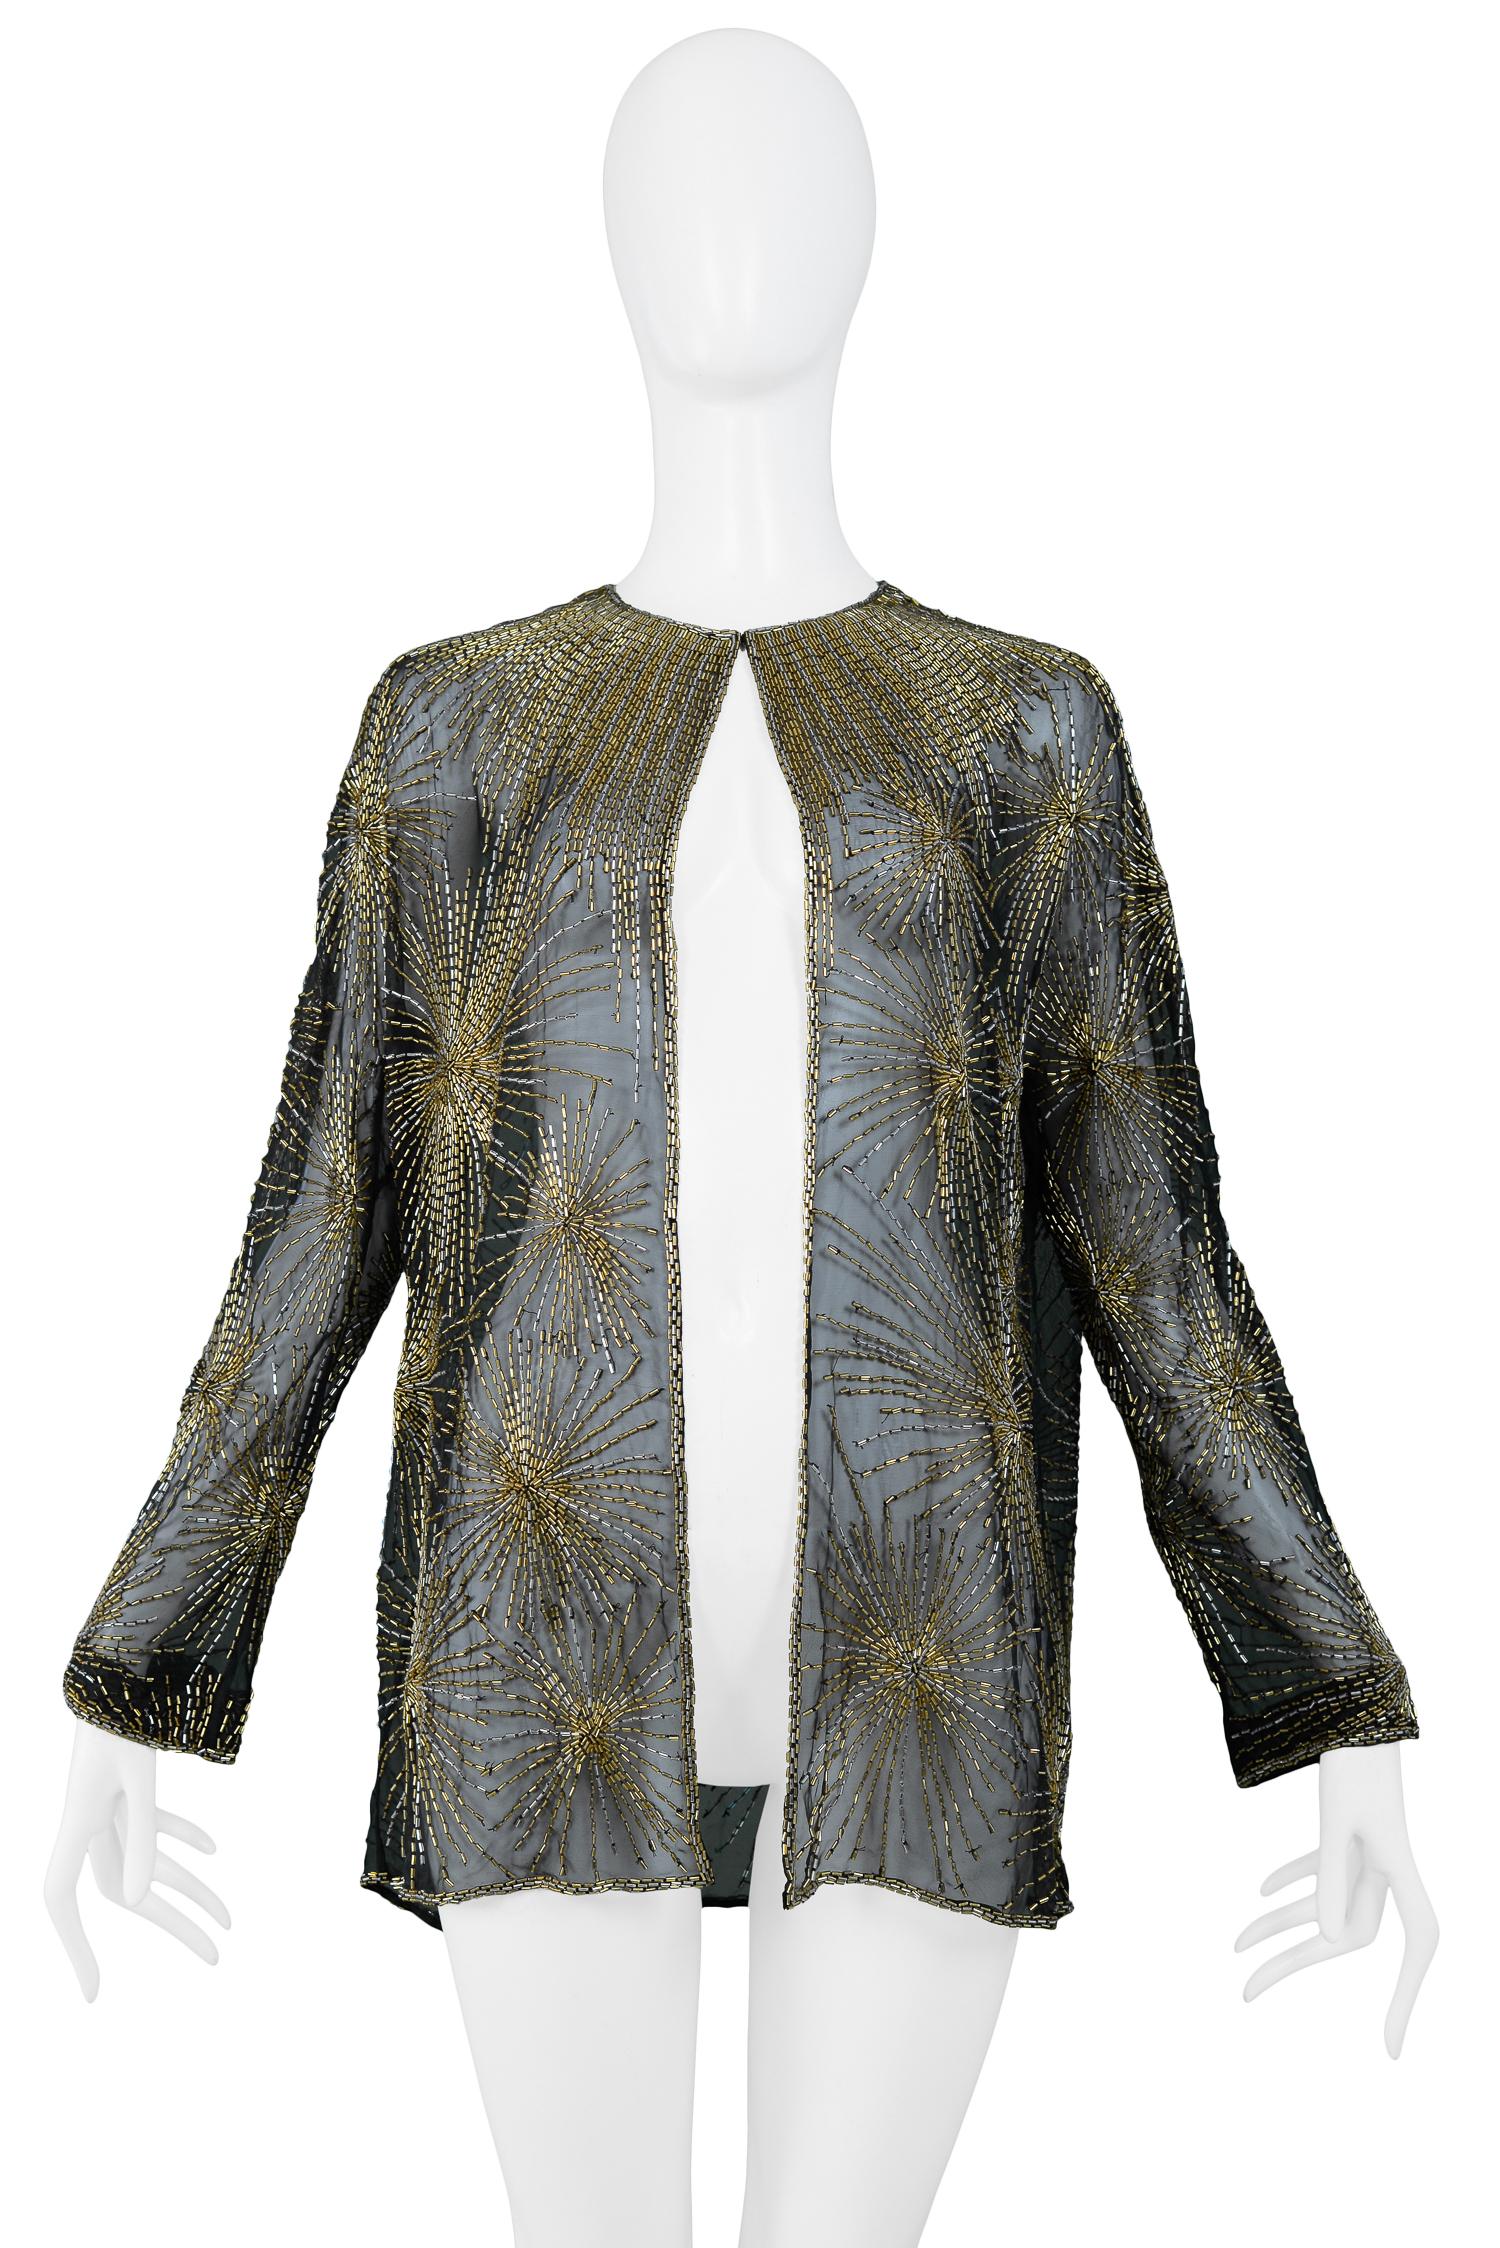 Vintage Halston black chiffon long sleeve evening jacket featuring allover gold and silver beaded firework bursts, a cascade of beads at the neckline and double beaded trim along the opening and hemline. Single hook & eye closure at neck. From the